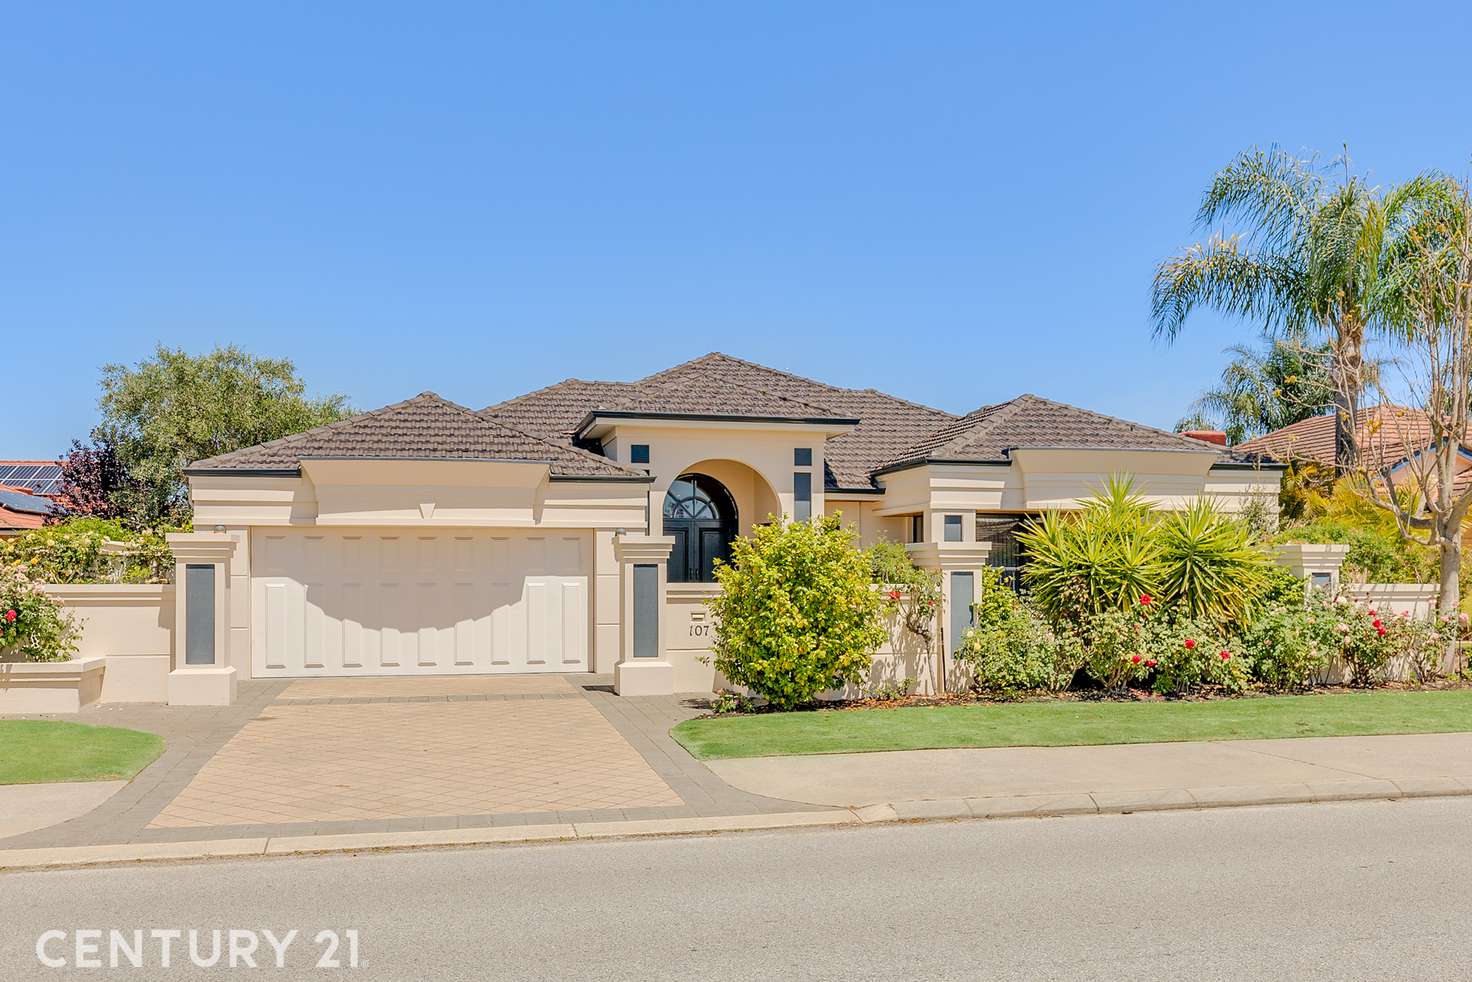 Main view of Homely house listing, 107 Goodwood Way, Canning Vale WA 6155